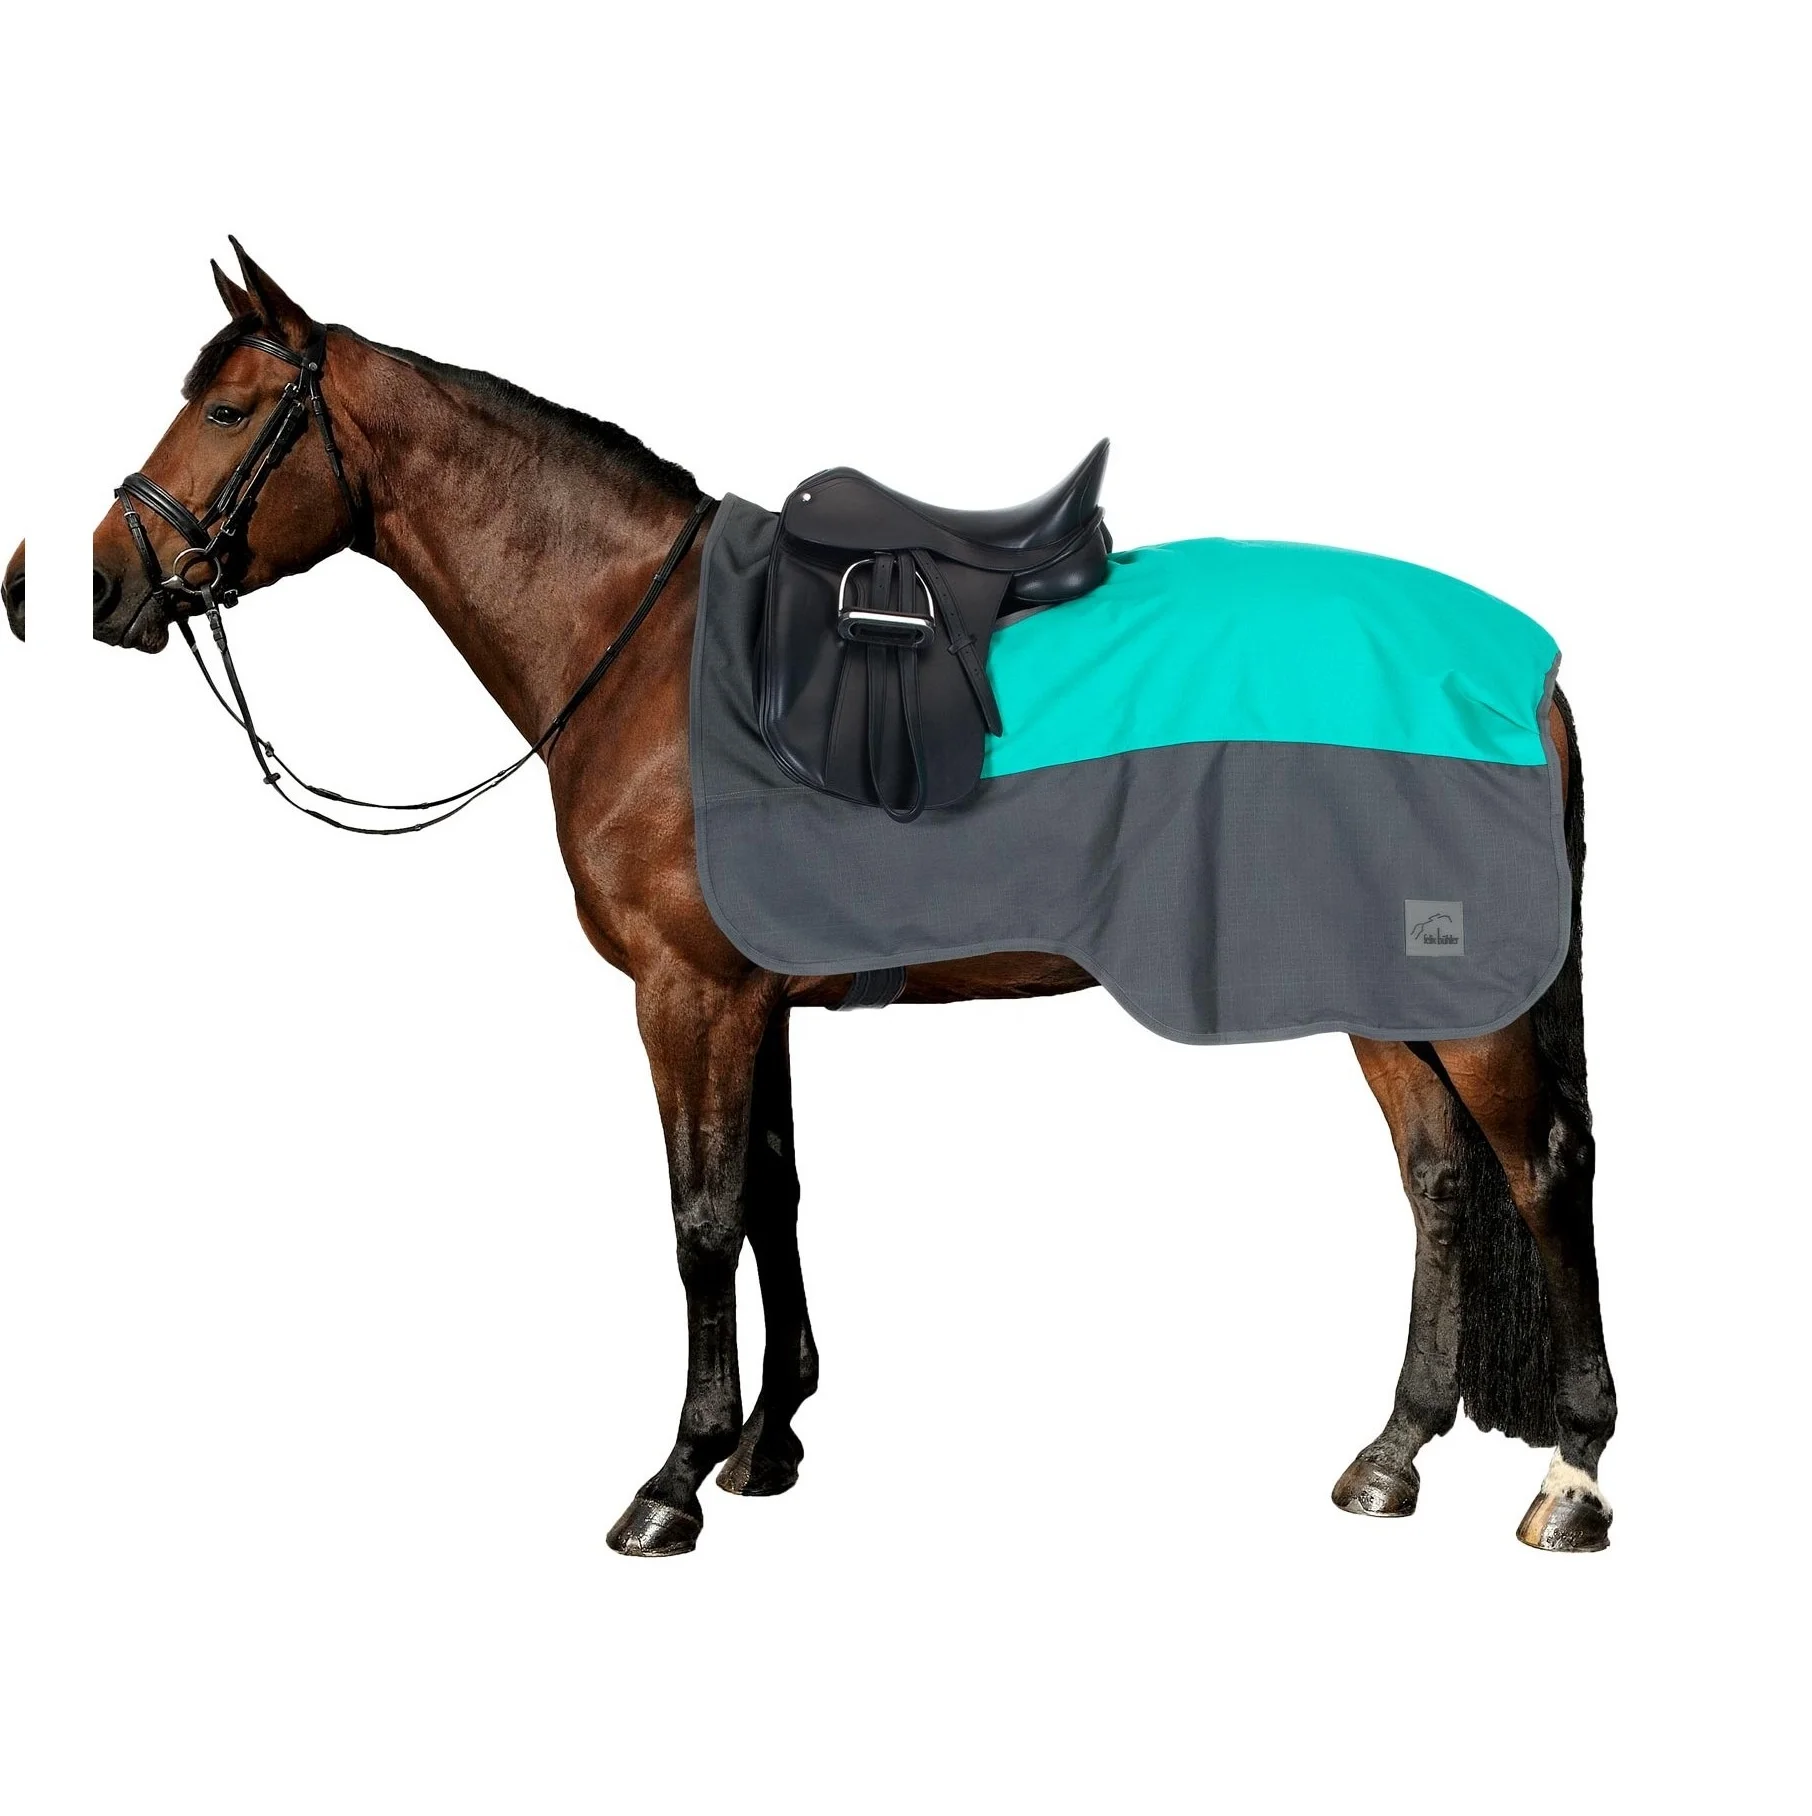 
HORSE CONTINENTAL PATTERN EXERCISE SHEET 600 Denier Ripstop Waterproof Breathable Horse Ripstop Exercise Sheet